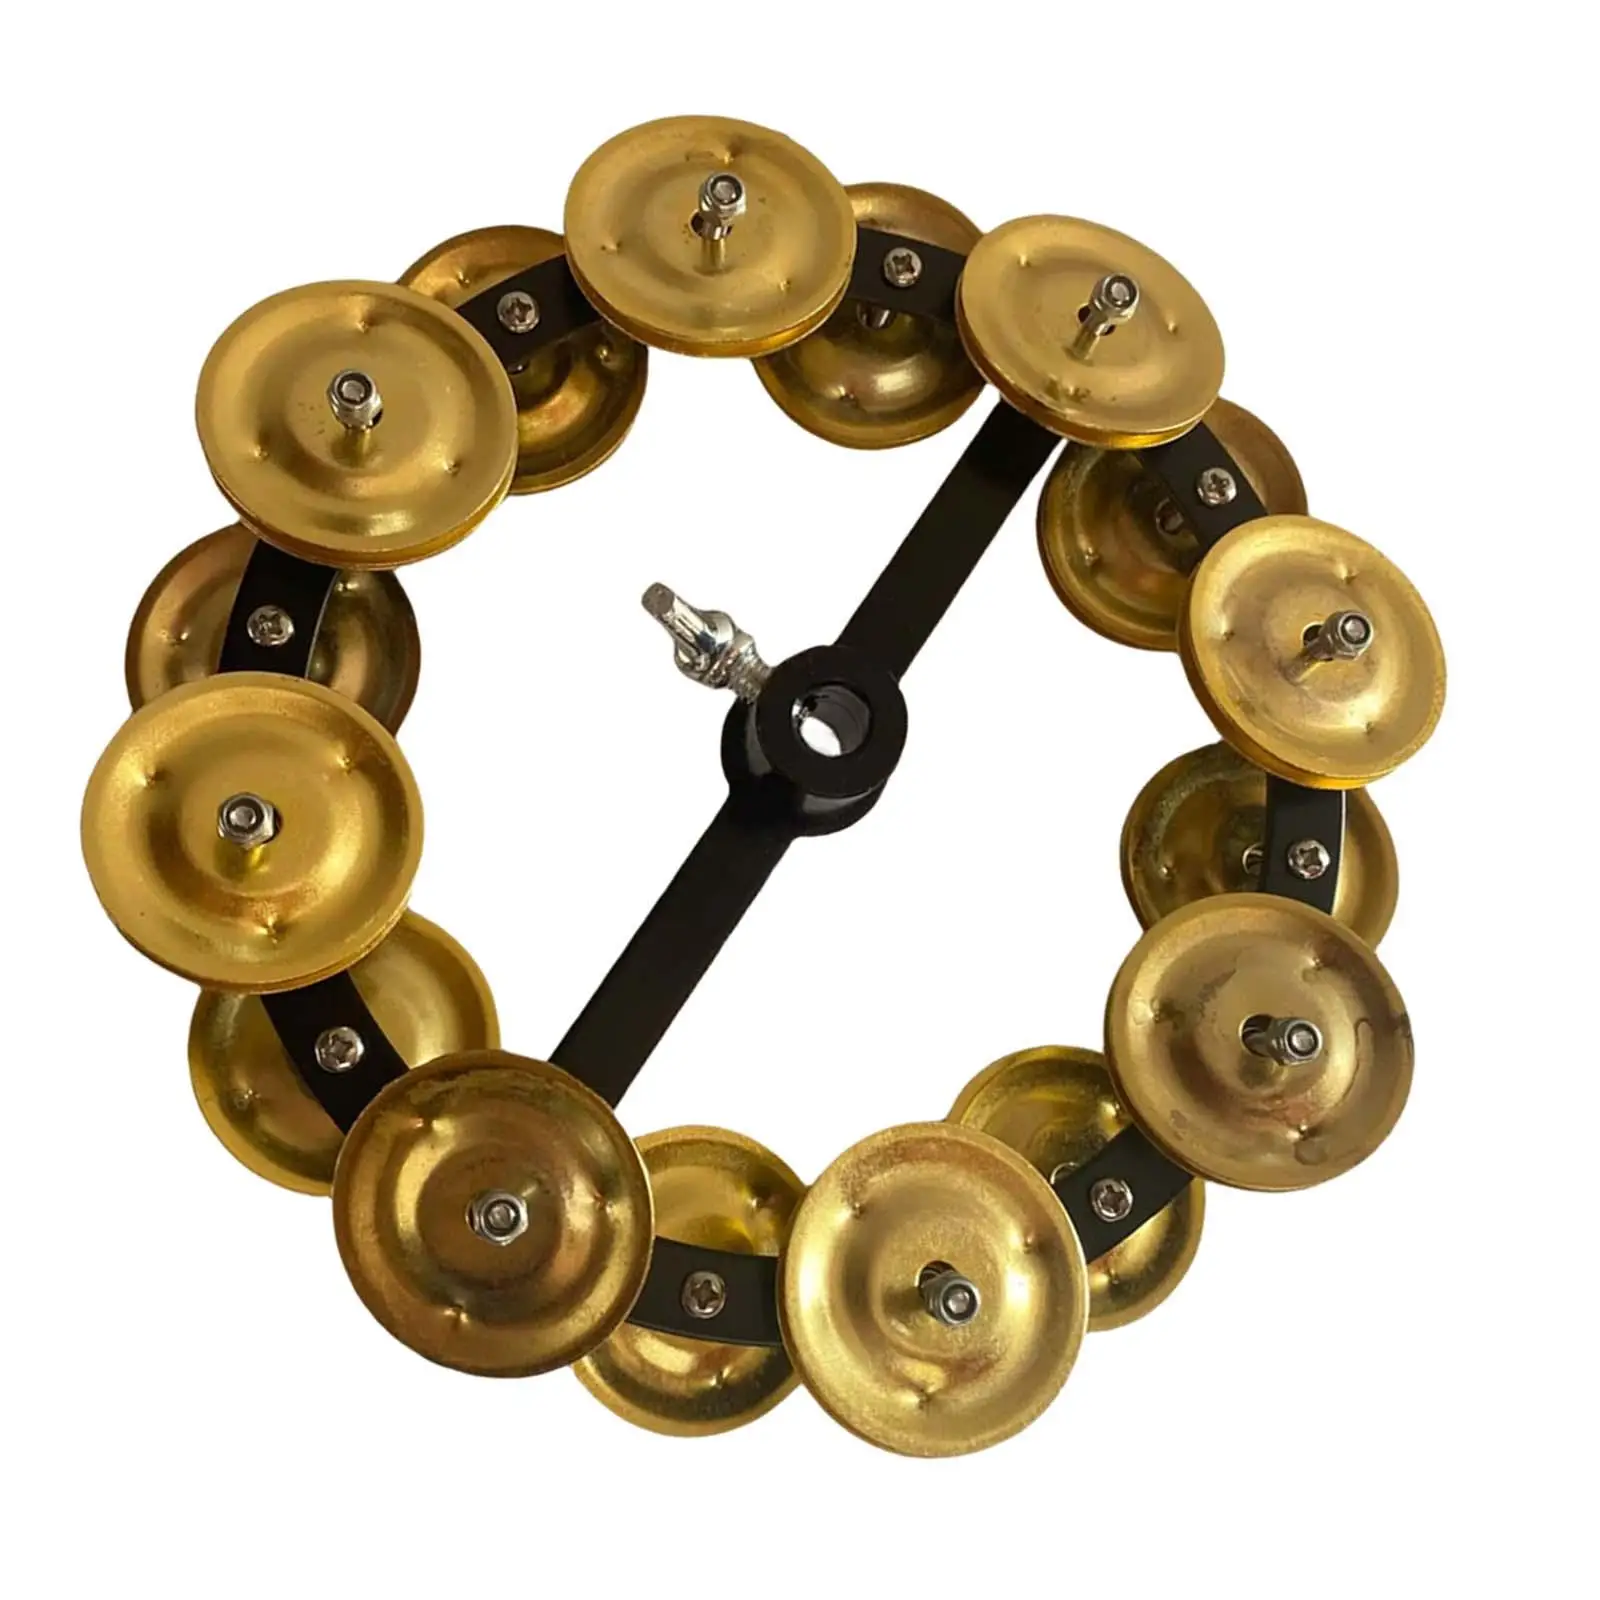 Hi Hat Tambourine Percussion Accessories for Creative Drum Kits Enthusiasts